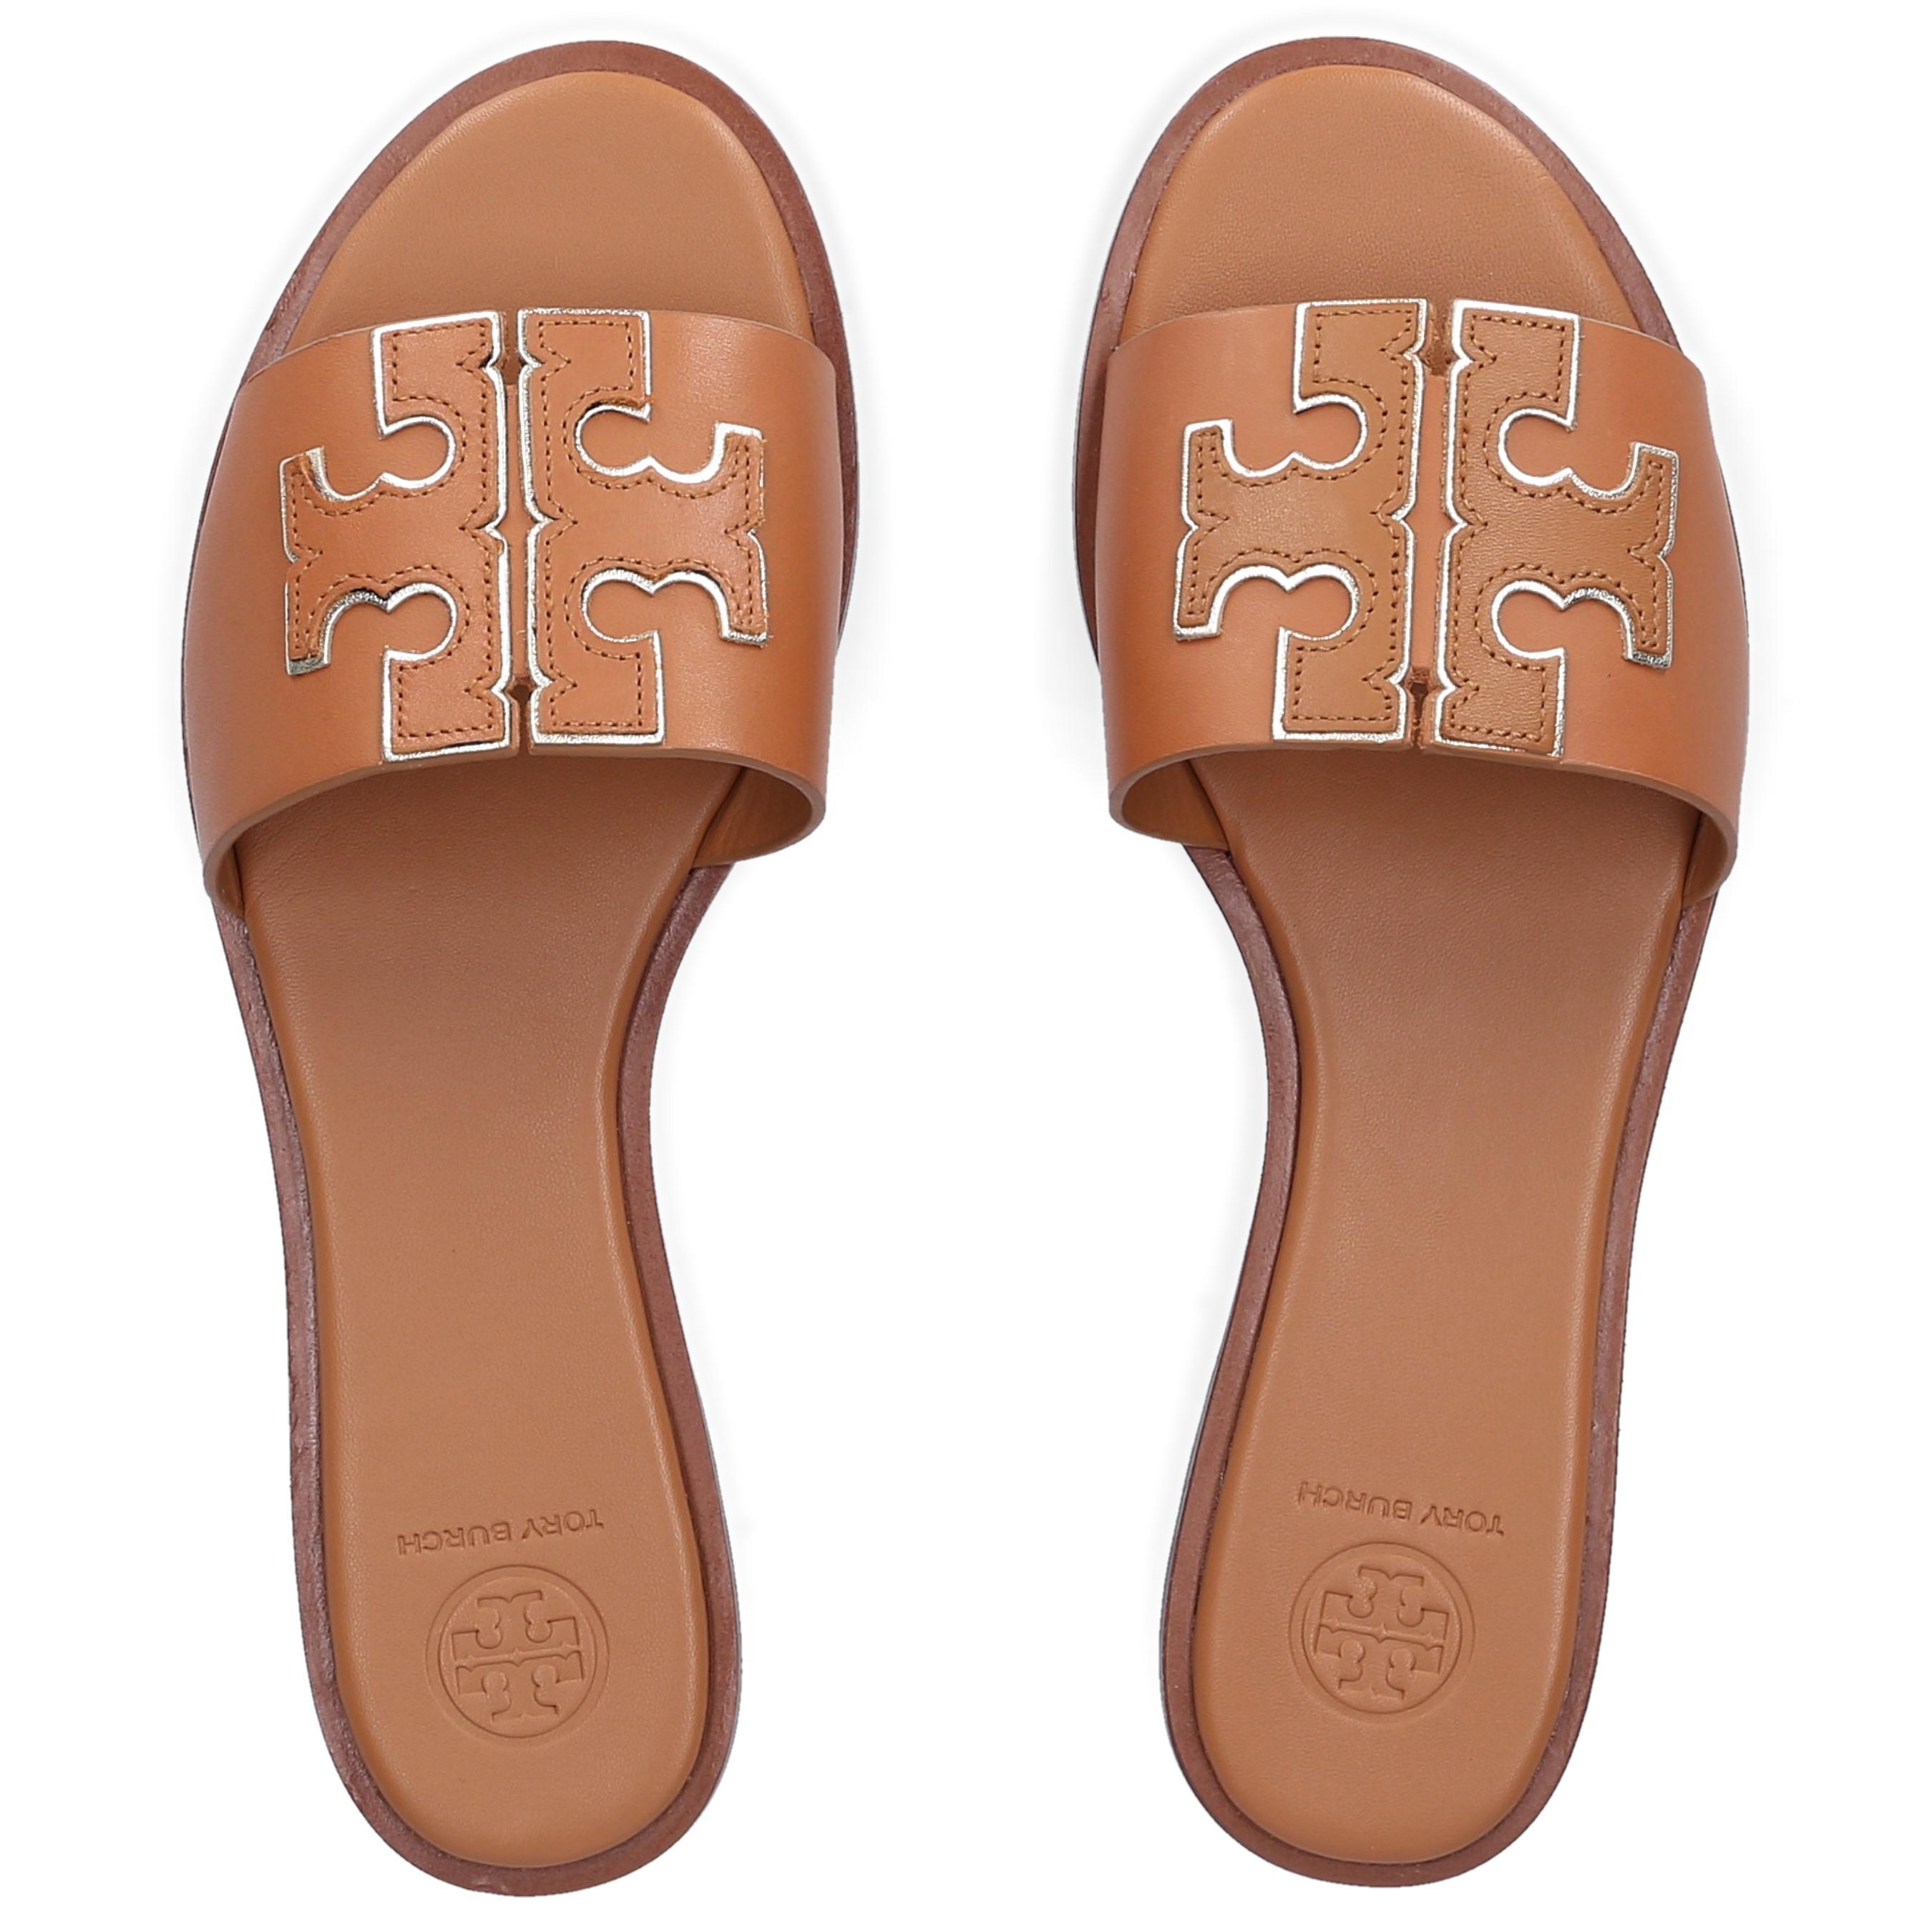 Tory Burch Leather Sandals Ines Slide in Beige,Gold (Natural) - Lyst